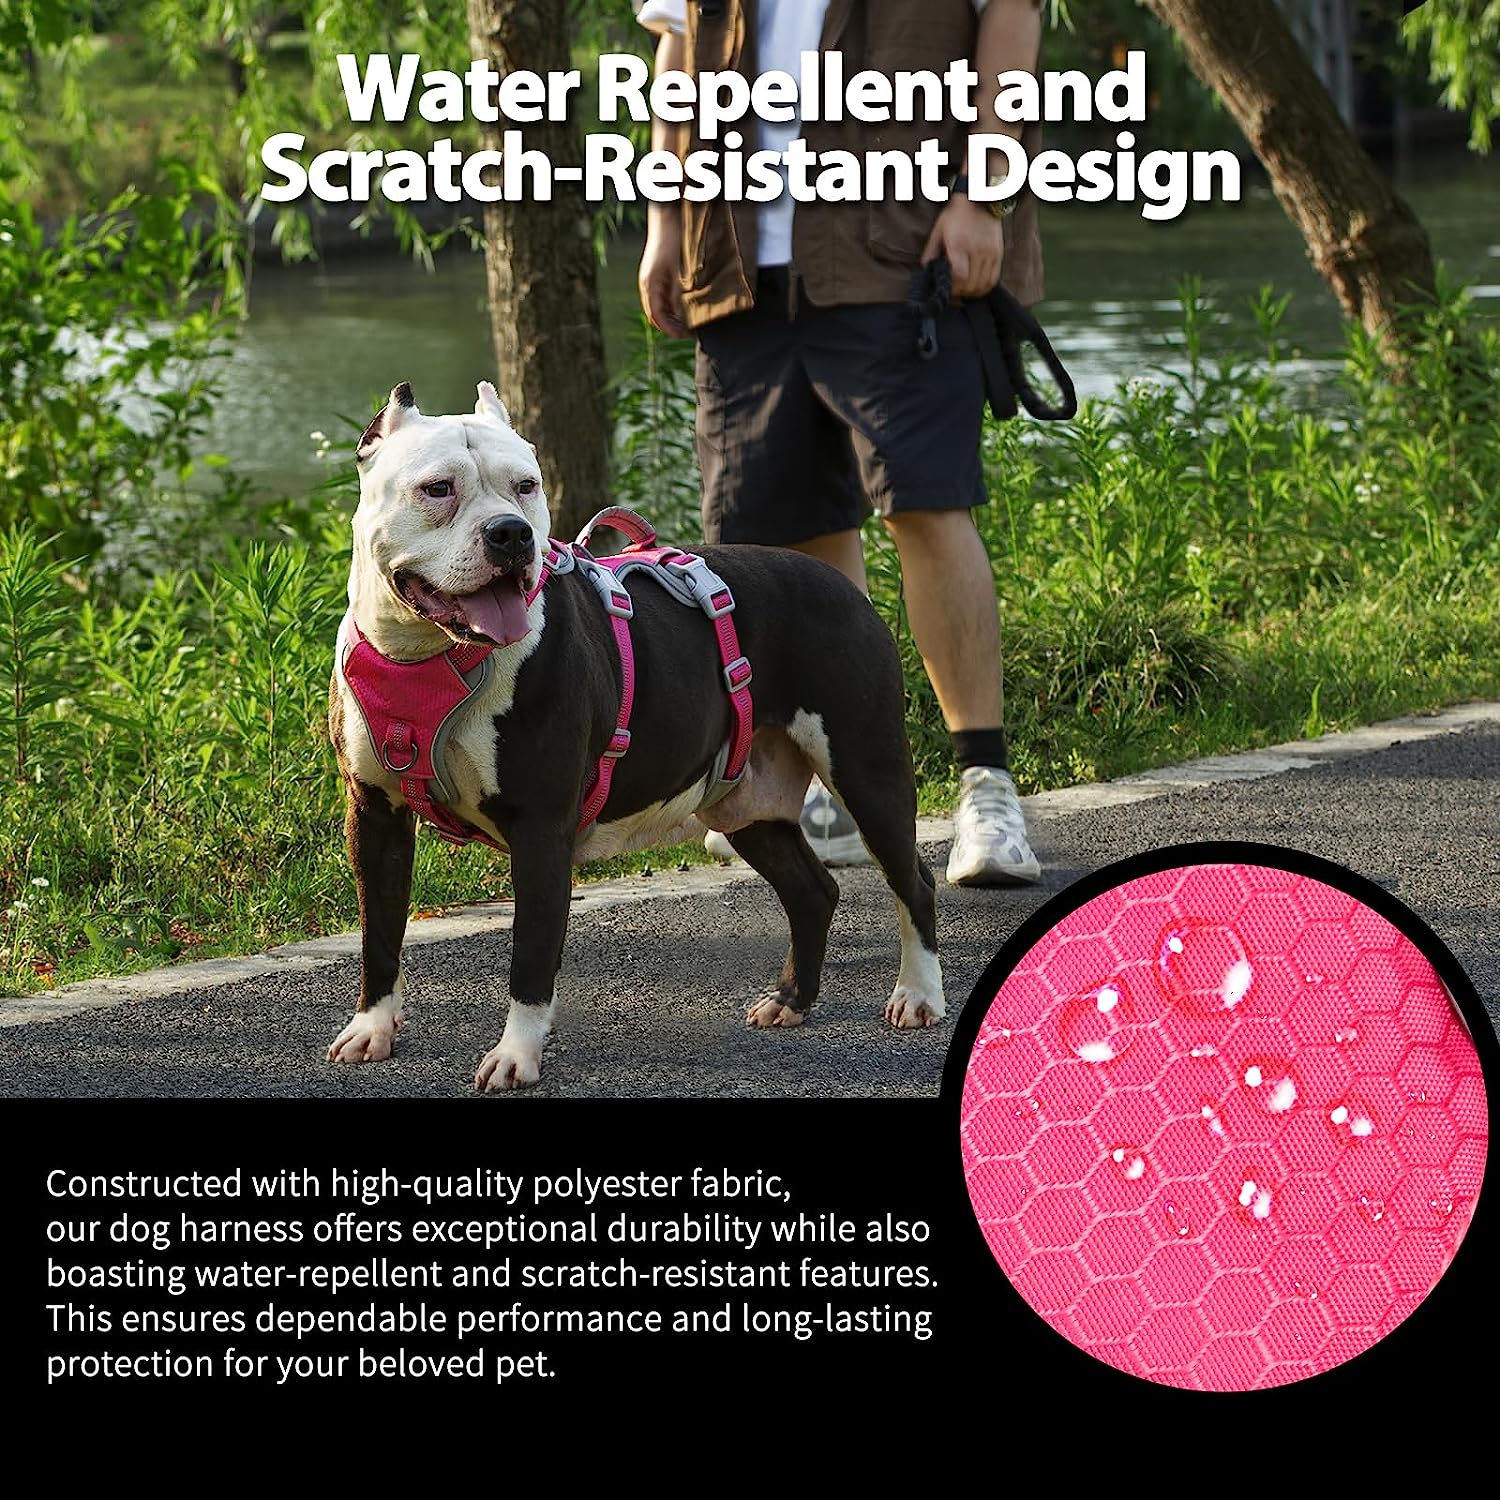 Escape Proof Dog Harness and Water-Repellent Dog Harness (Rose red)